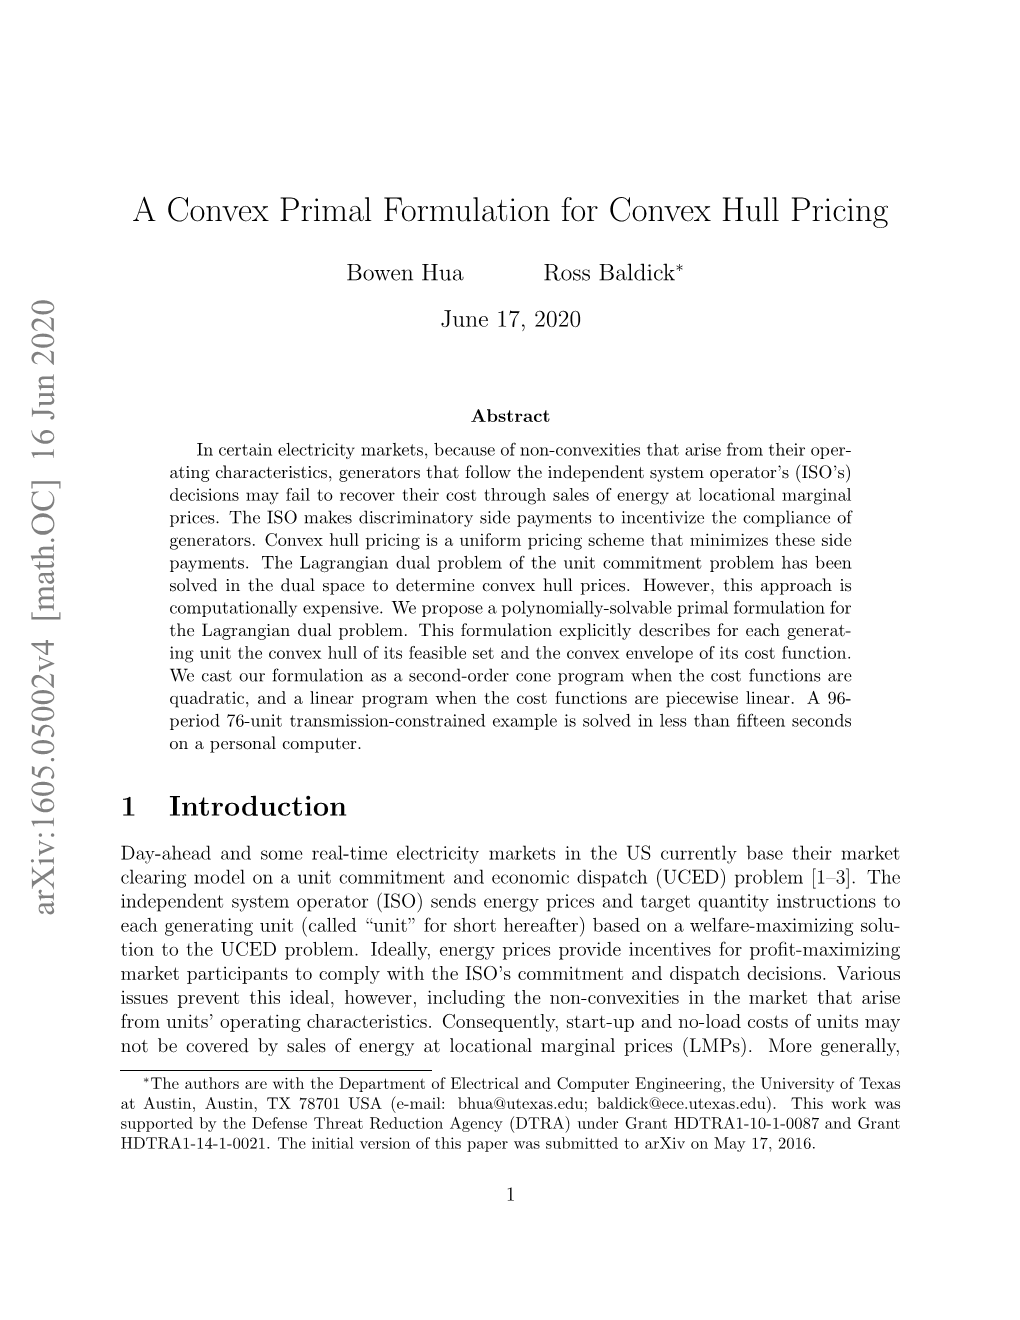 A Convex Primal Formulation for Convex Hull Pricing